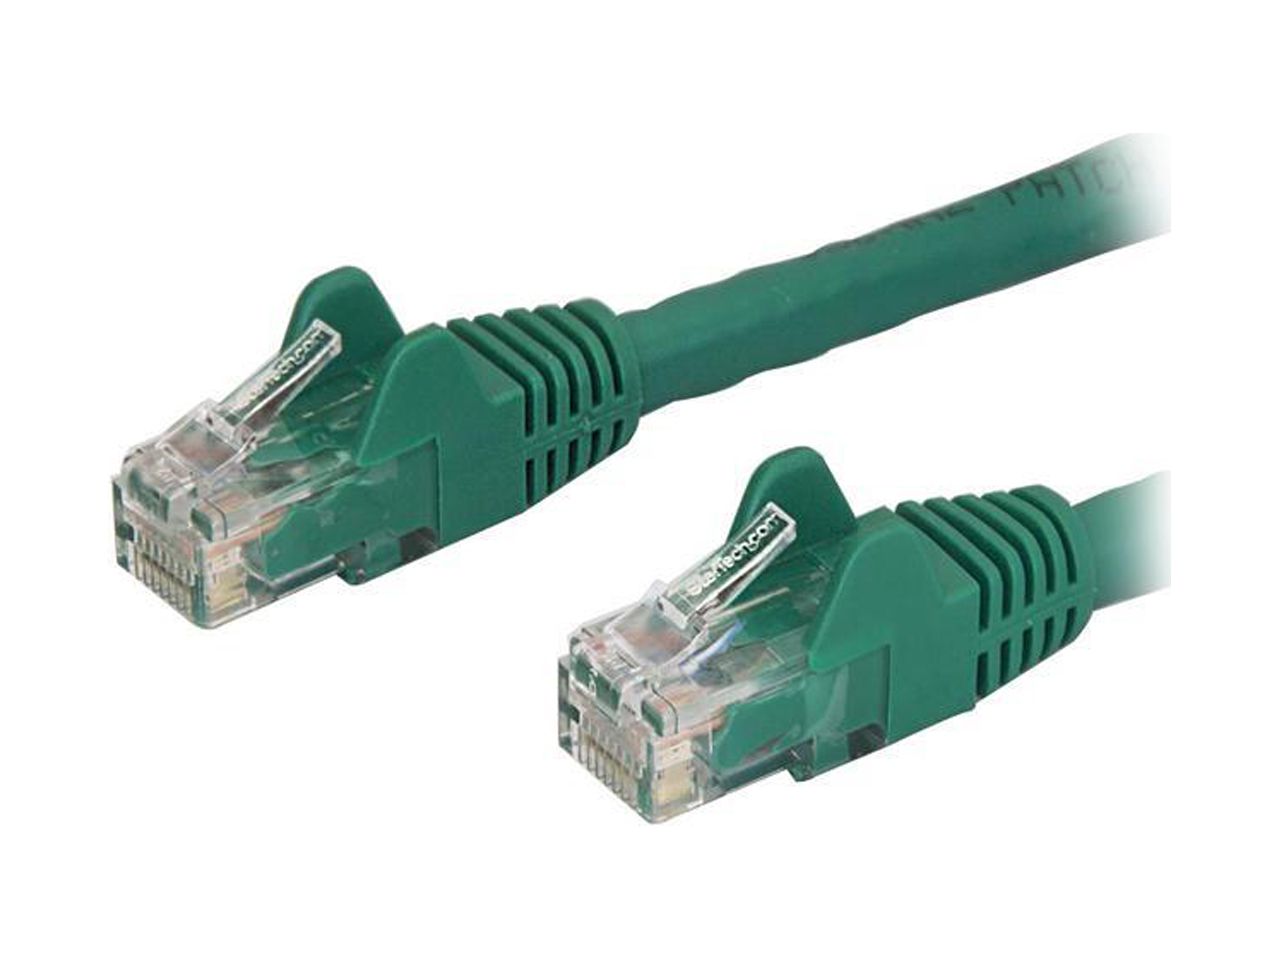 StarTech.com N6PATCH150GN 150 ft. Cat 6 Green Cat 6 Cables - image 1 of 2